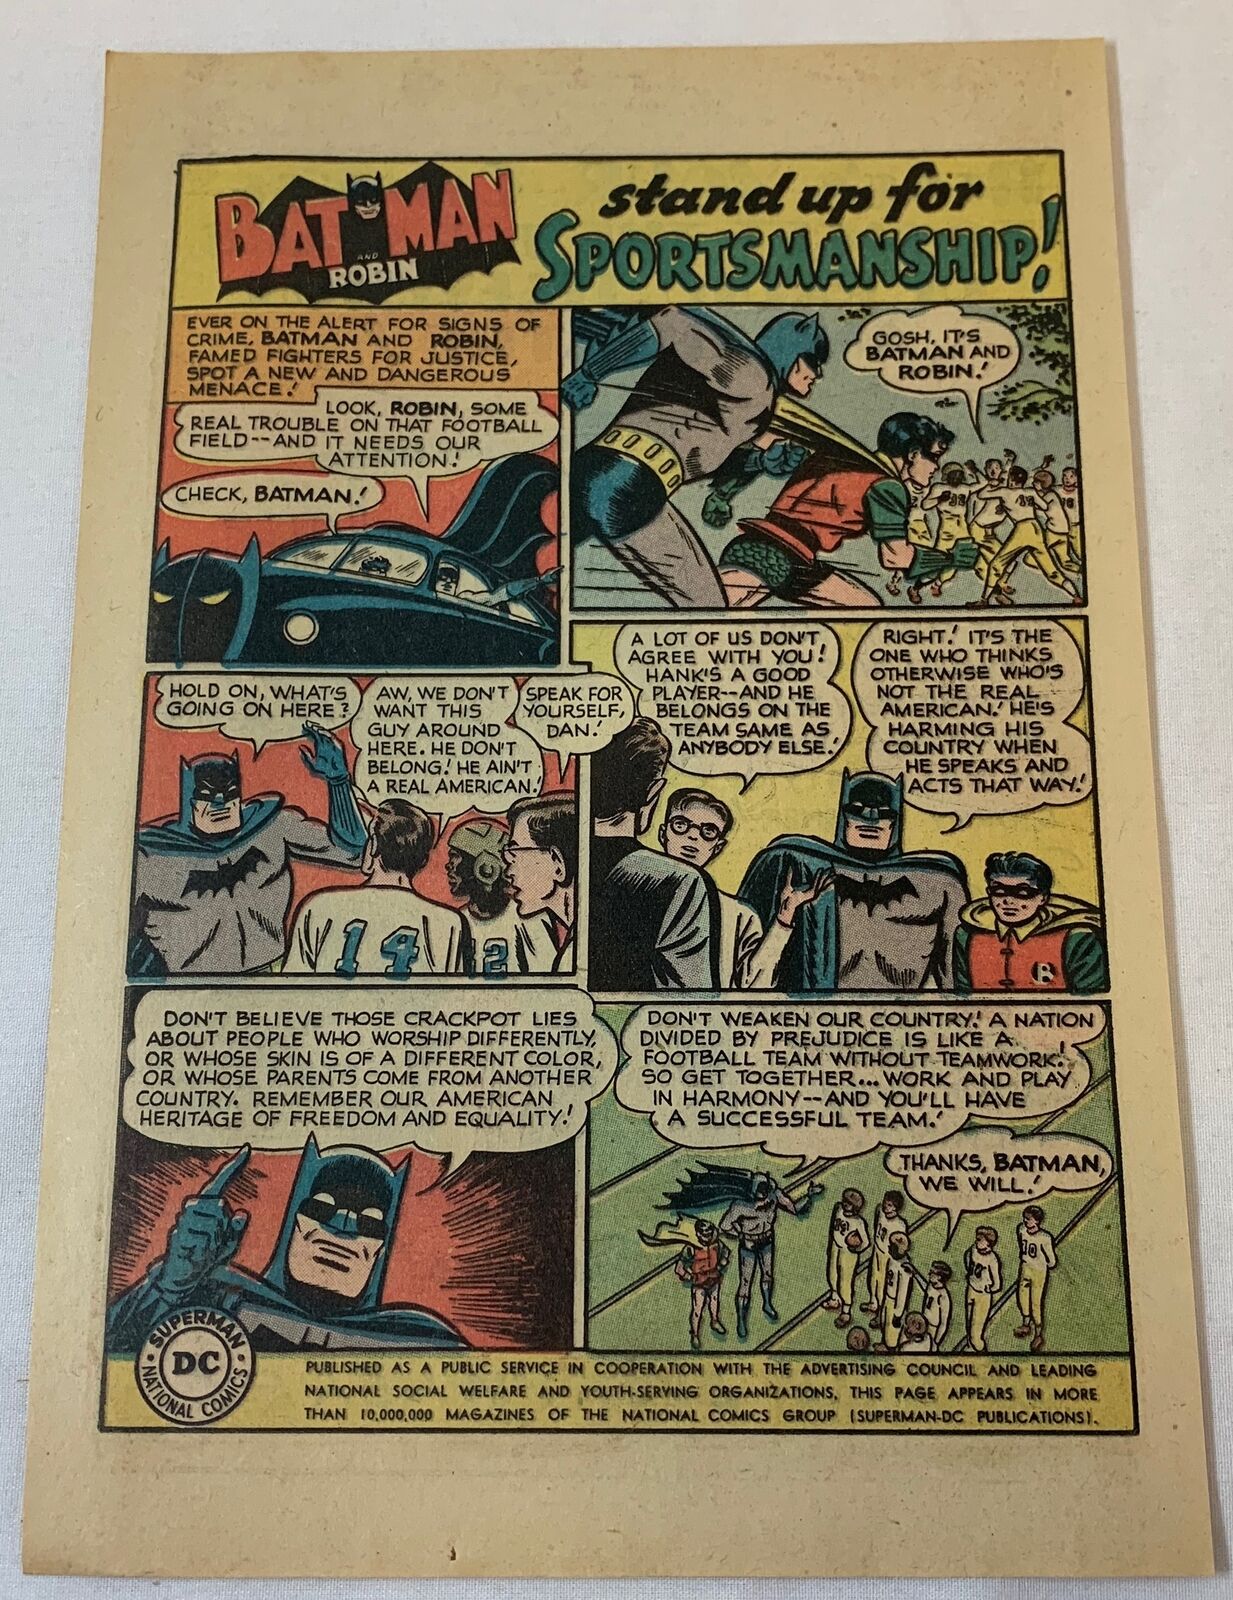 1949 BATMAN Anti-Racism Civil Rights PSA ad page ~ Stand Up for Sportsmanship